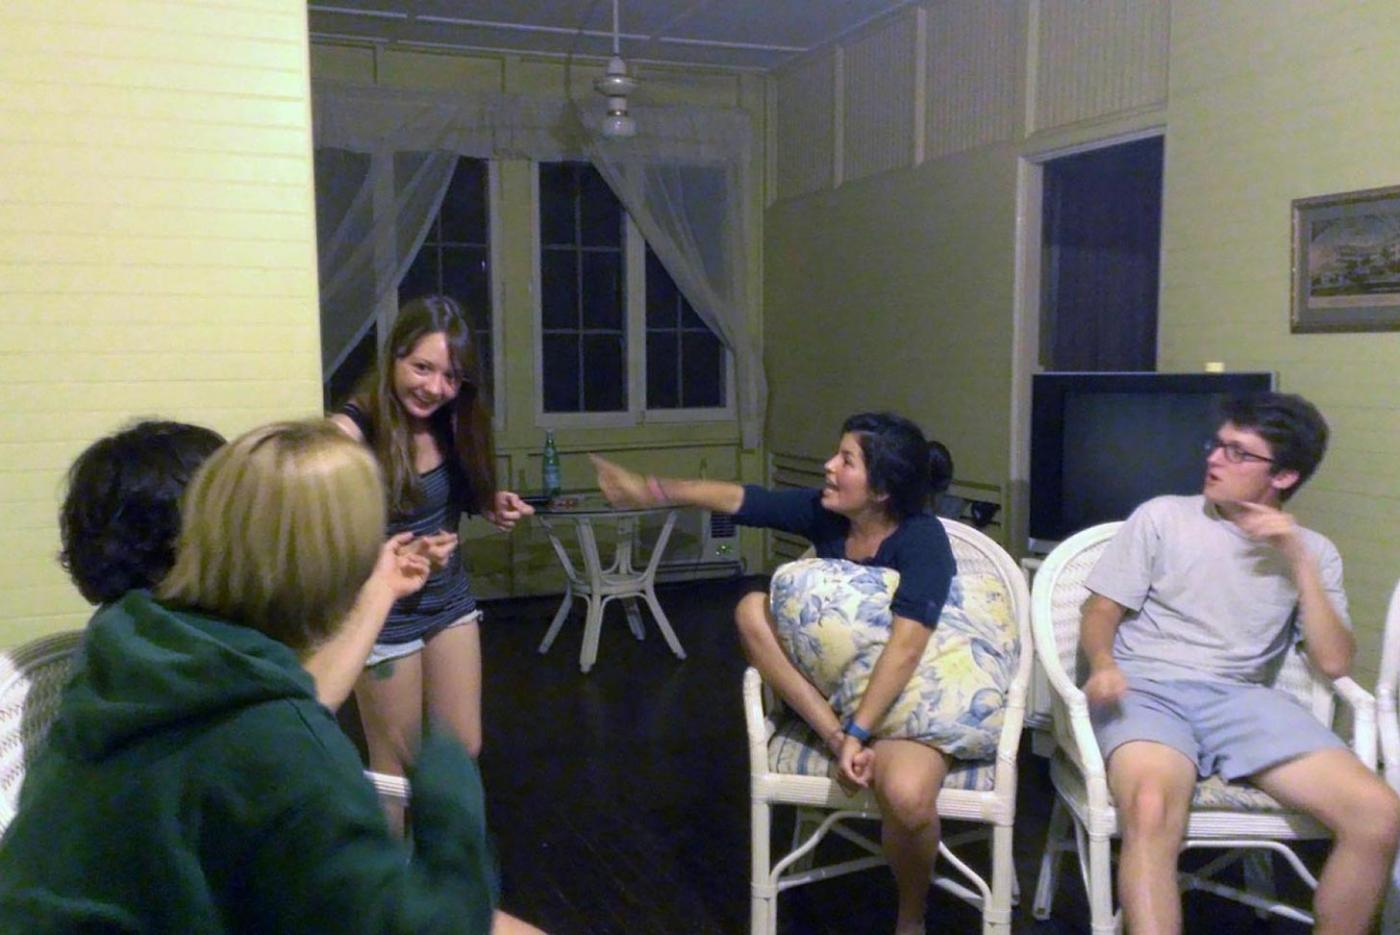 Game night began with charades in the villa on this July evening.